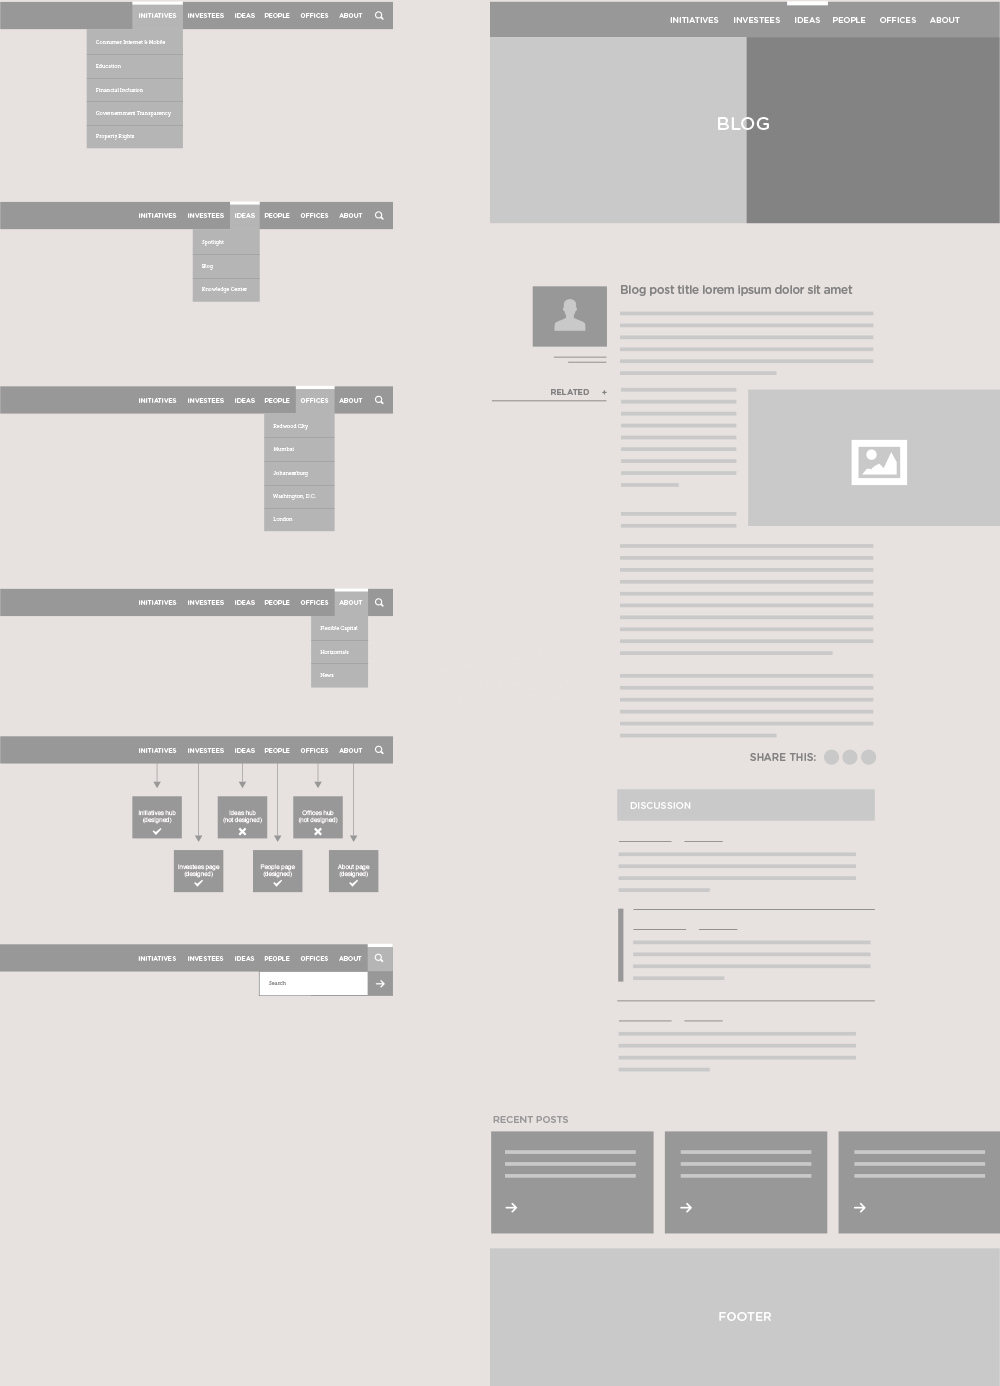 Early wireframes for information architecture and page layout